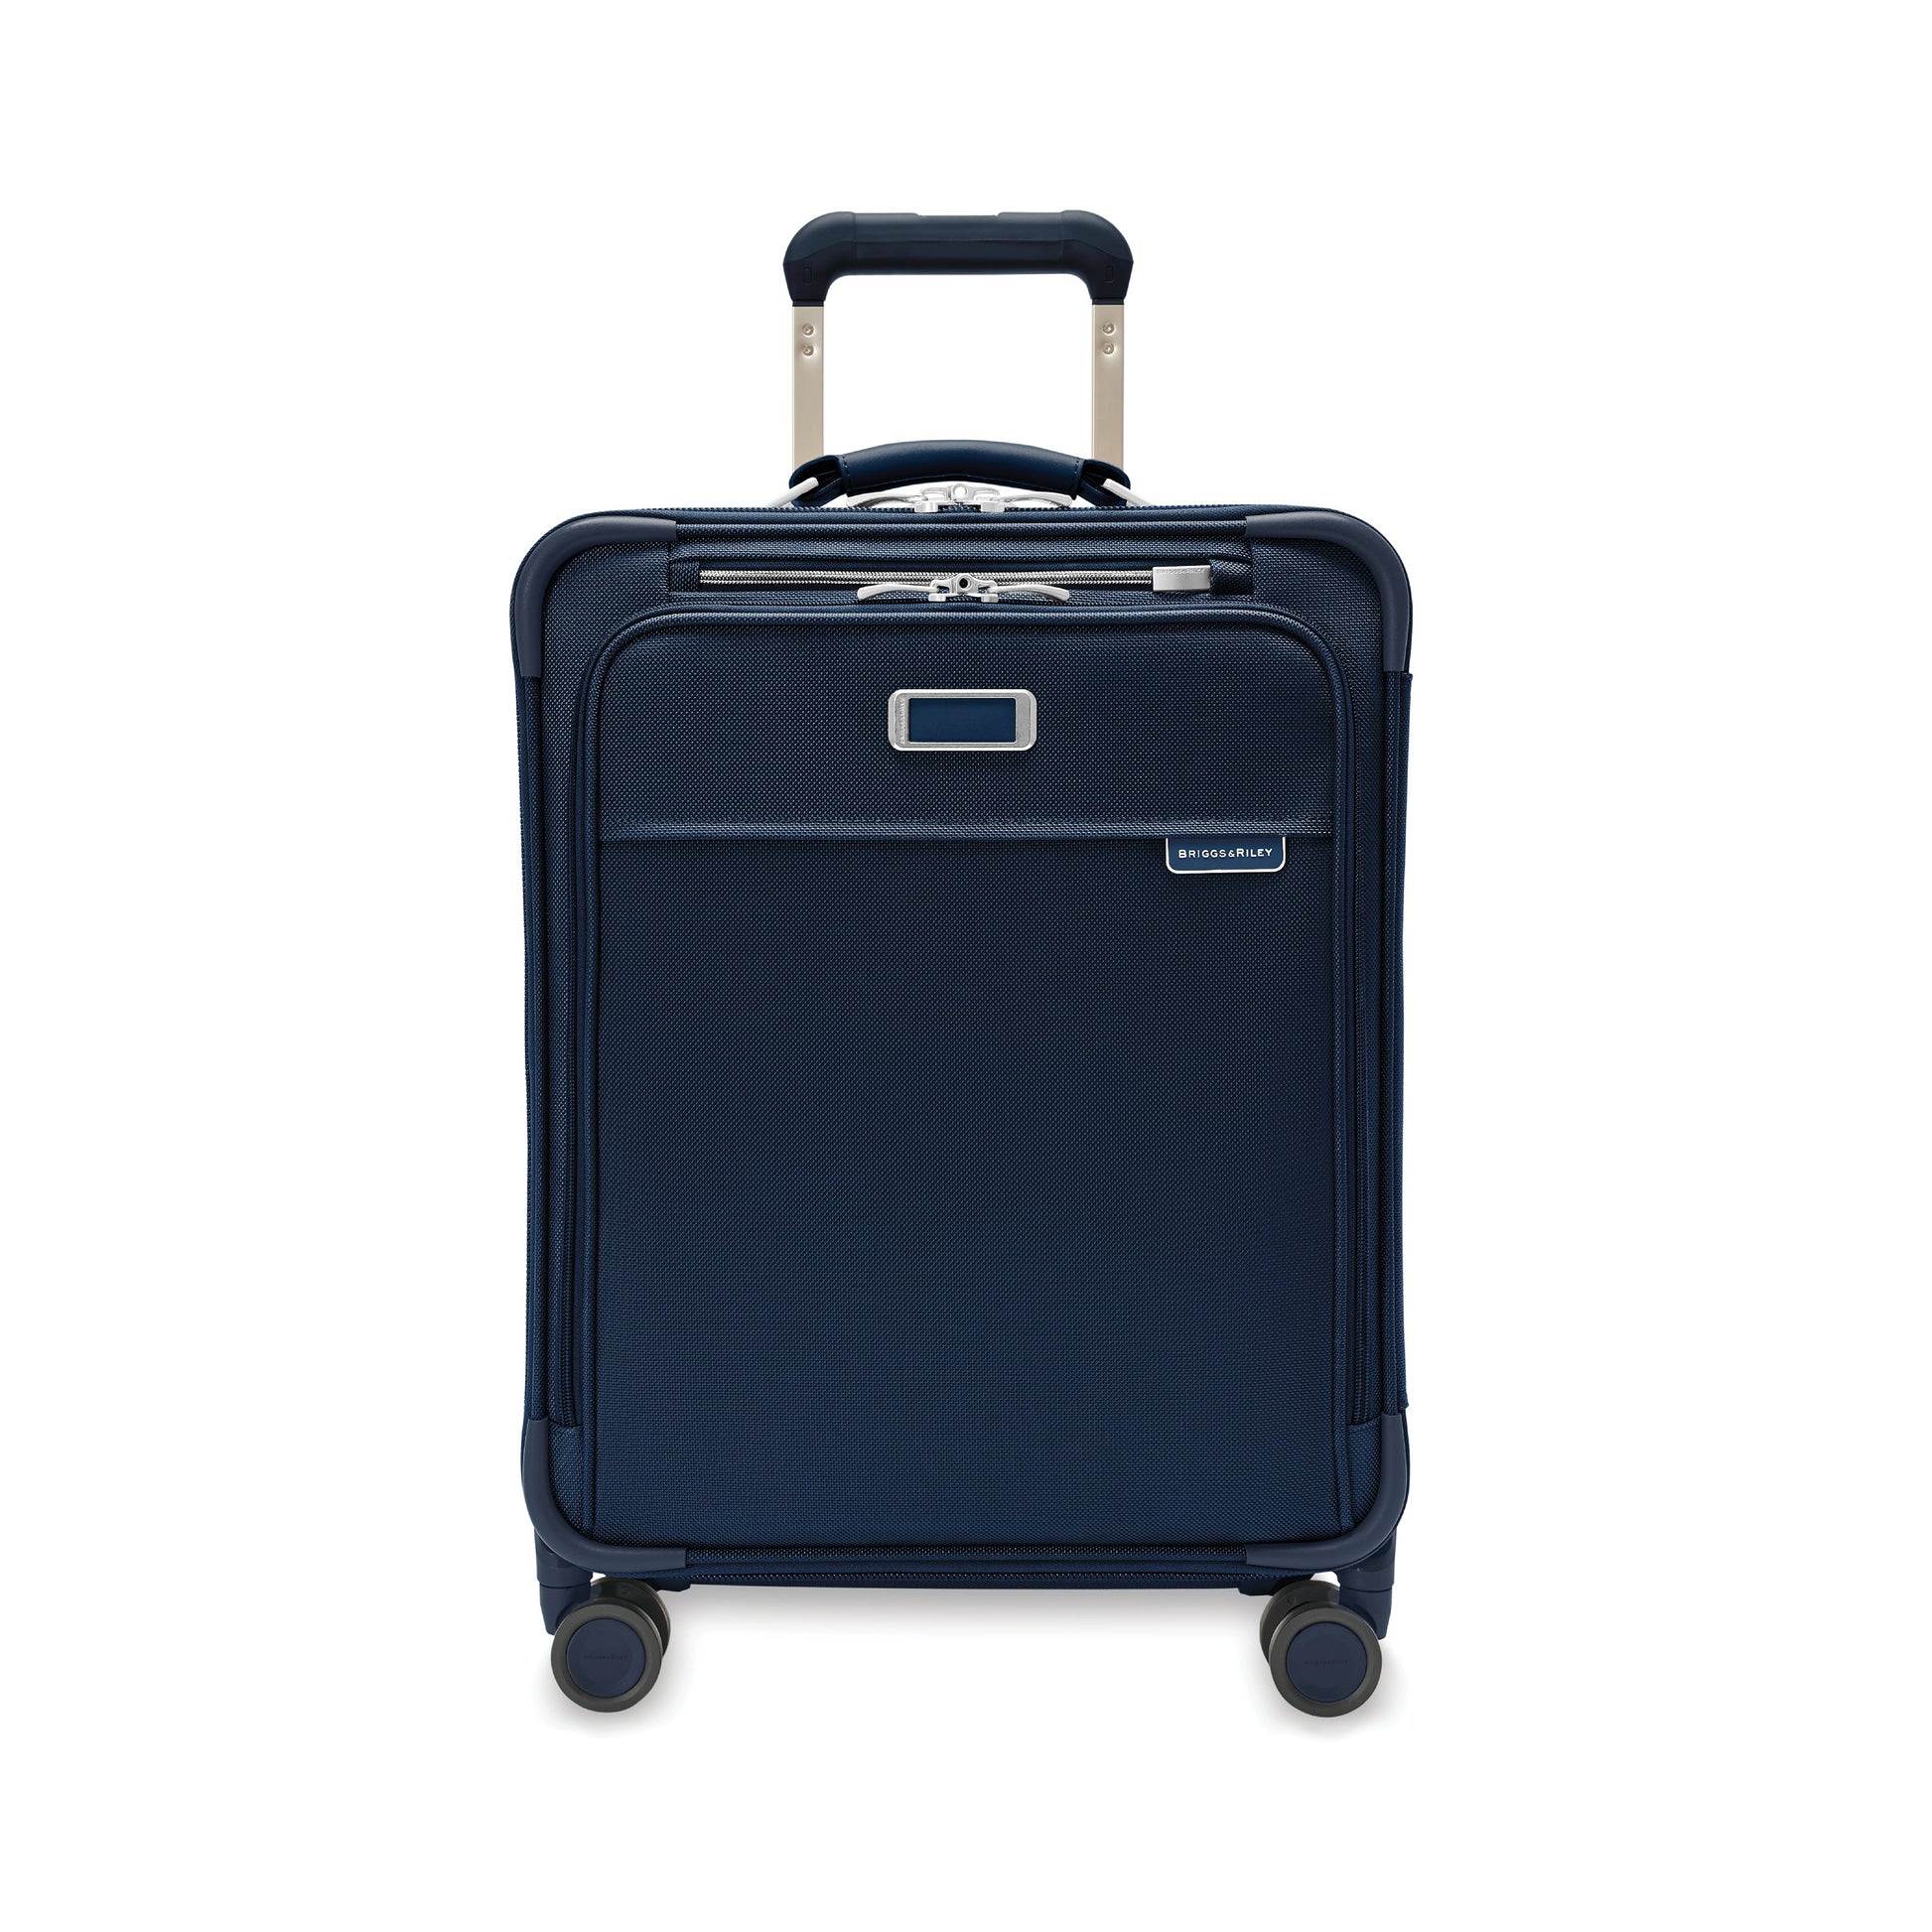 Briggs & Riley NEW Baseline Global Carry-On Spinner Luggage - Navy